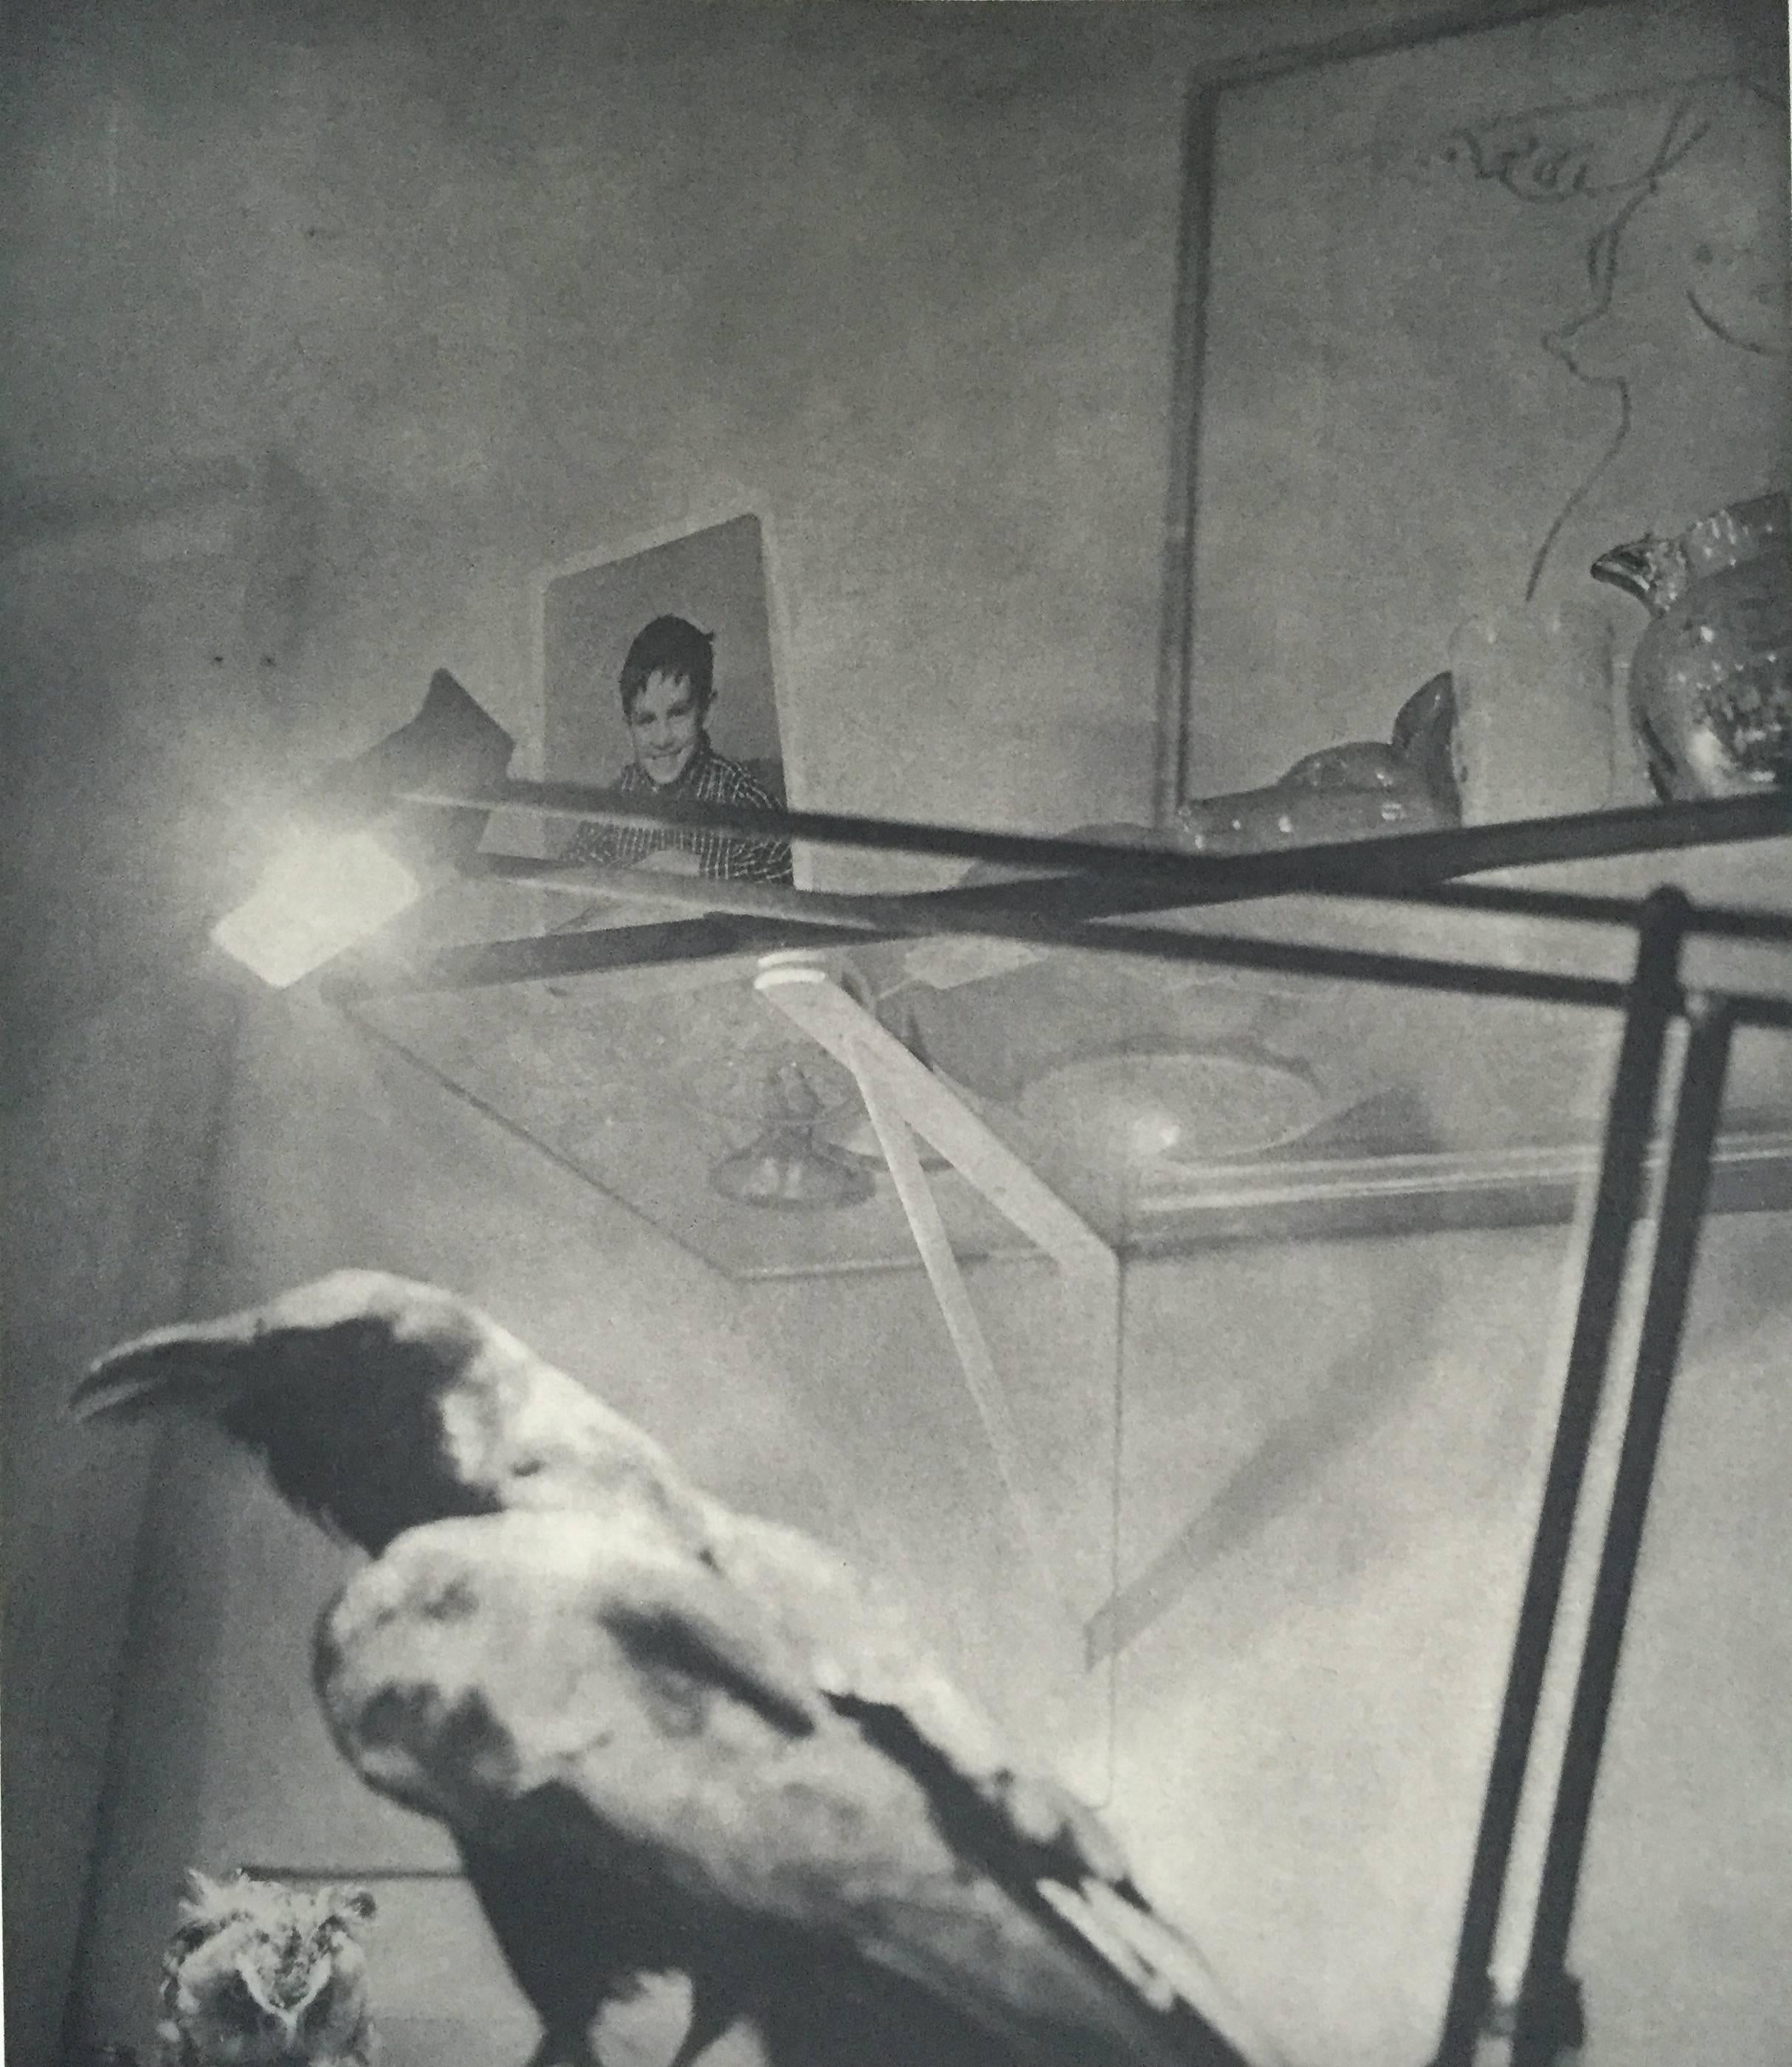 First edition, published by Steidl, 2001.

The result of a childhood memory, which he describes in the first pages of this book, Jim Dine presents a series of extraordinary black and white photographs depicting various birds. With 36 images